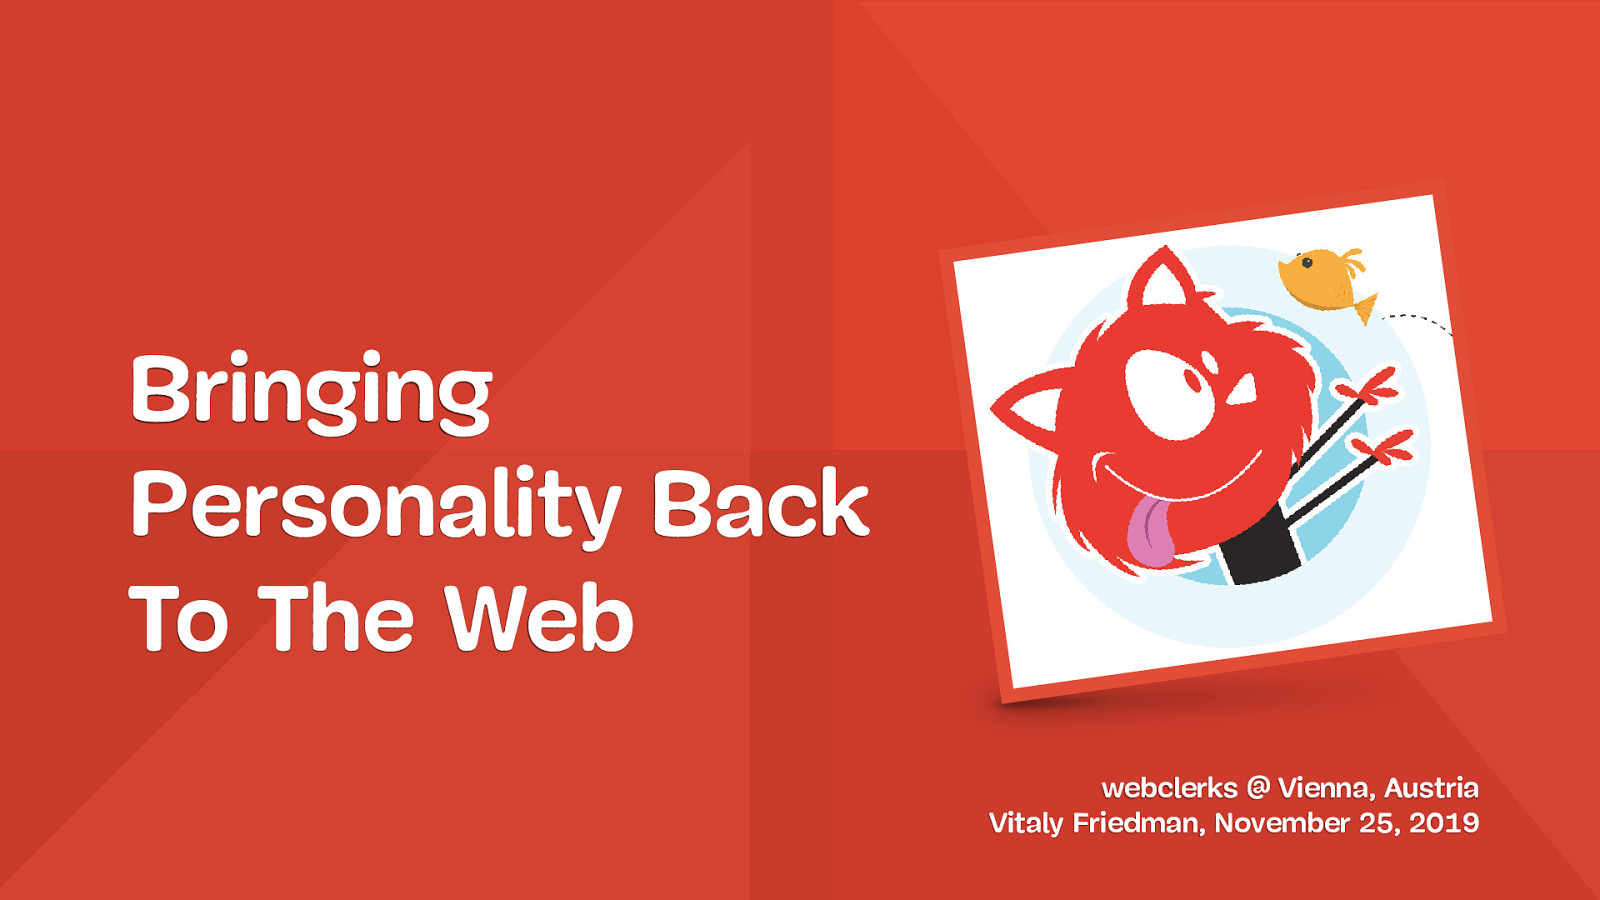 Bringing Personality Back To The Web